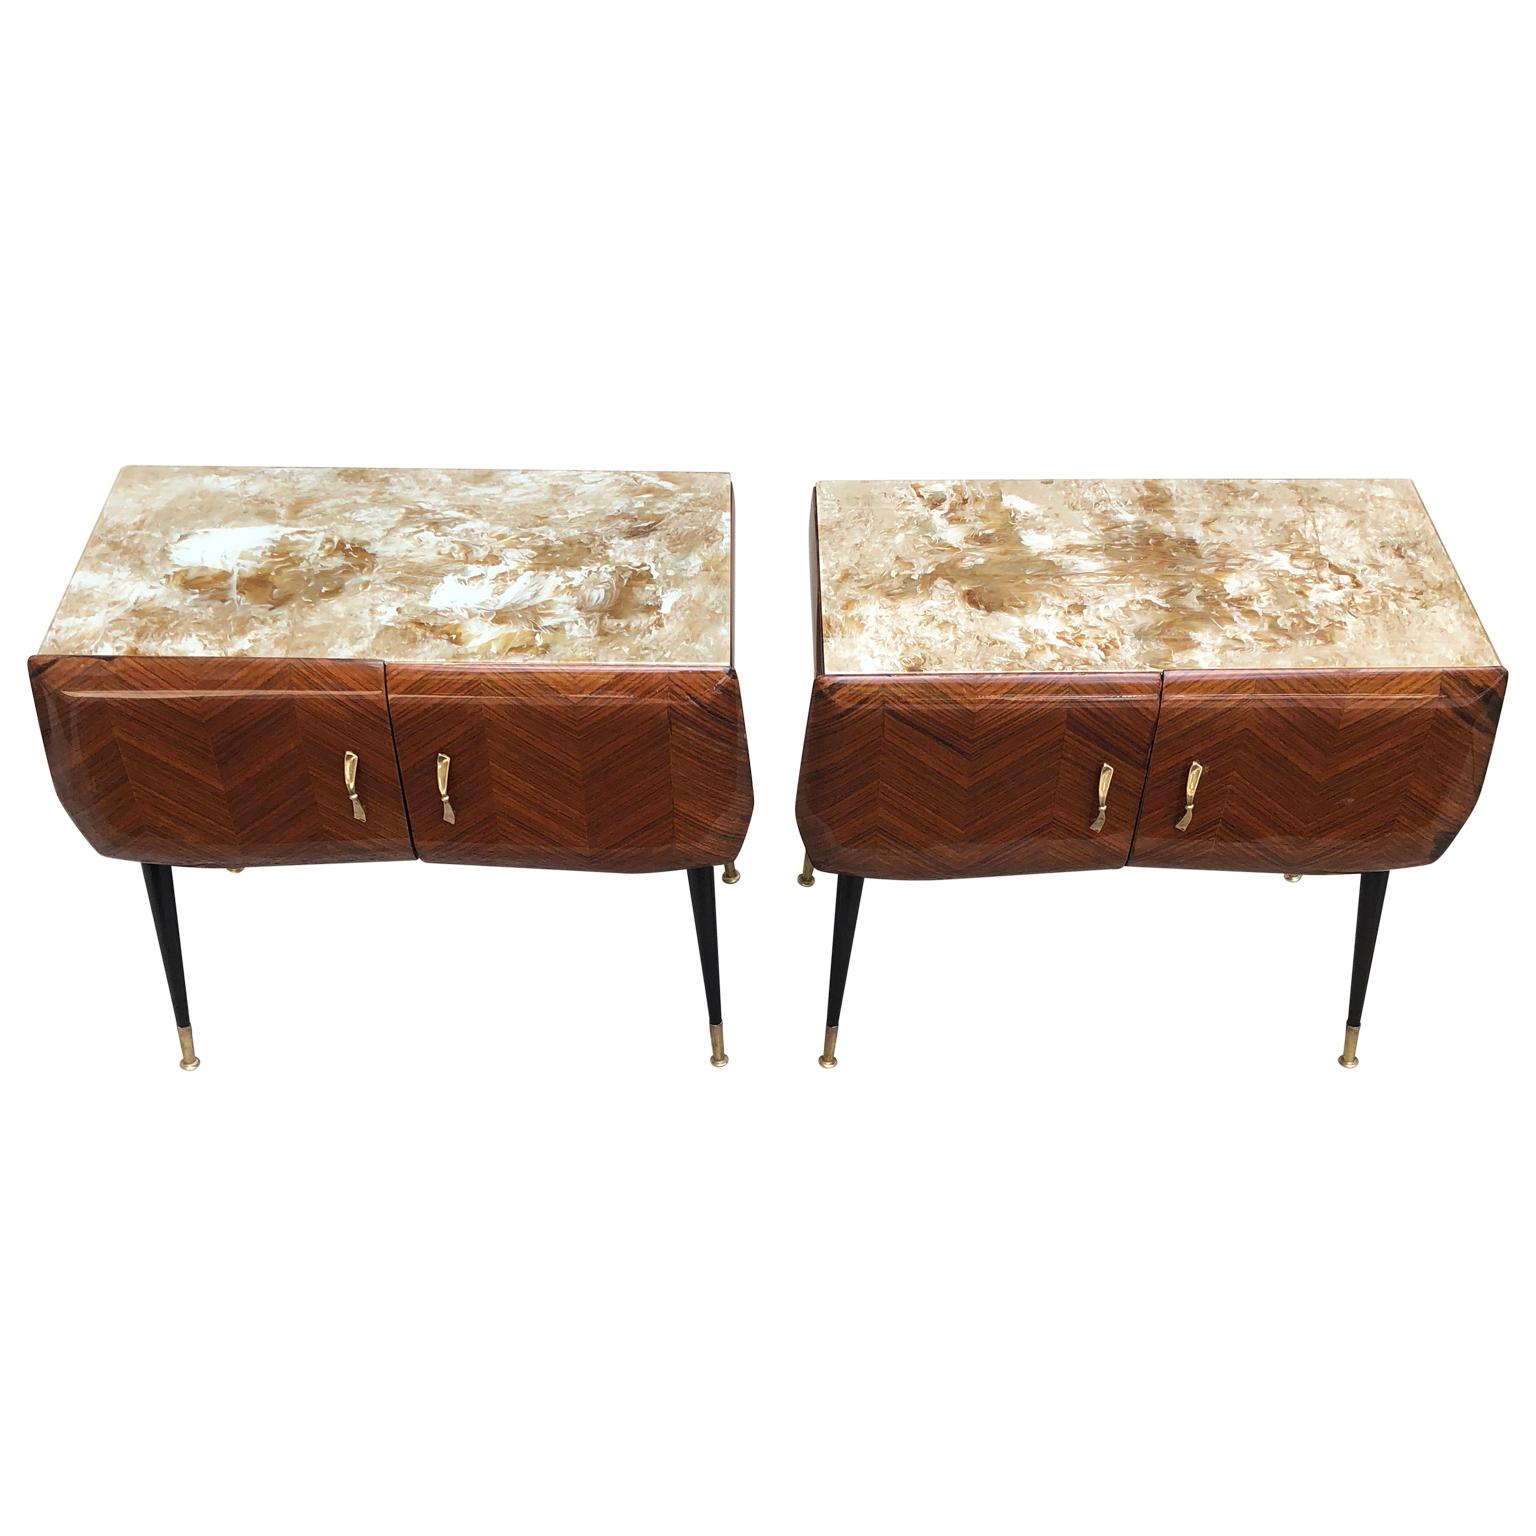 Cast Pair of Italian Mid-Century Modern Vittorio Dassi Bed Side Tables or Cabinets